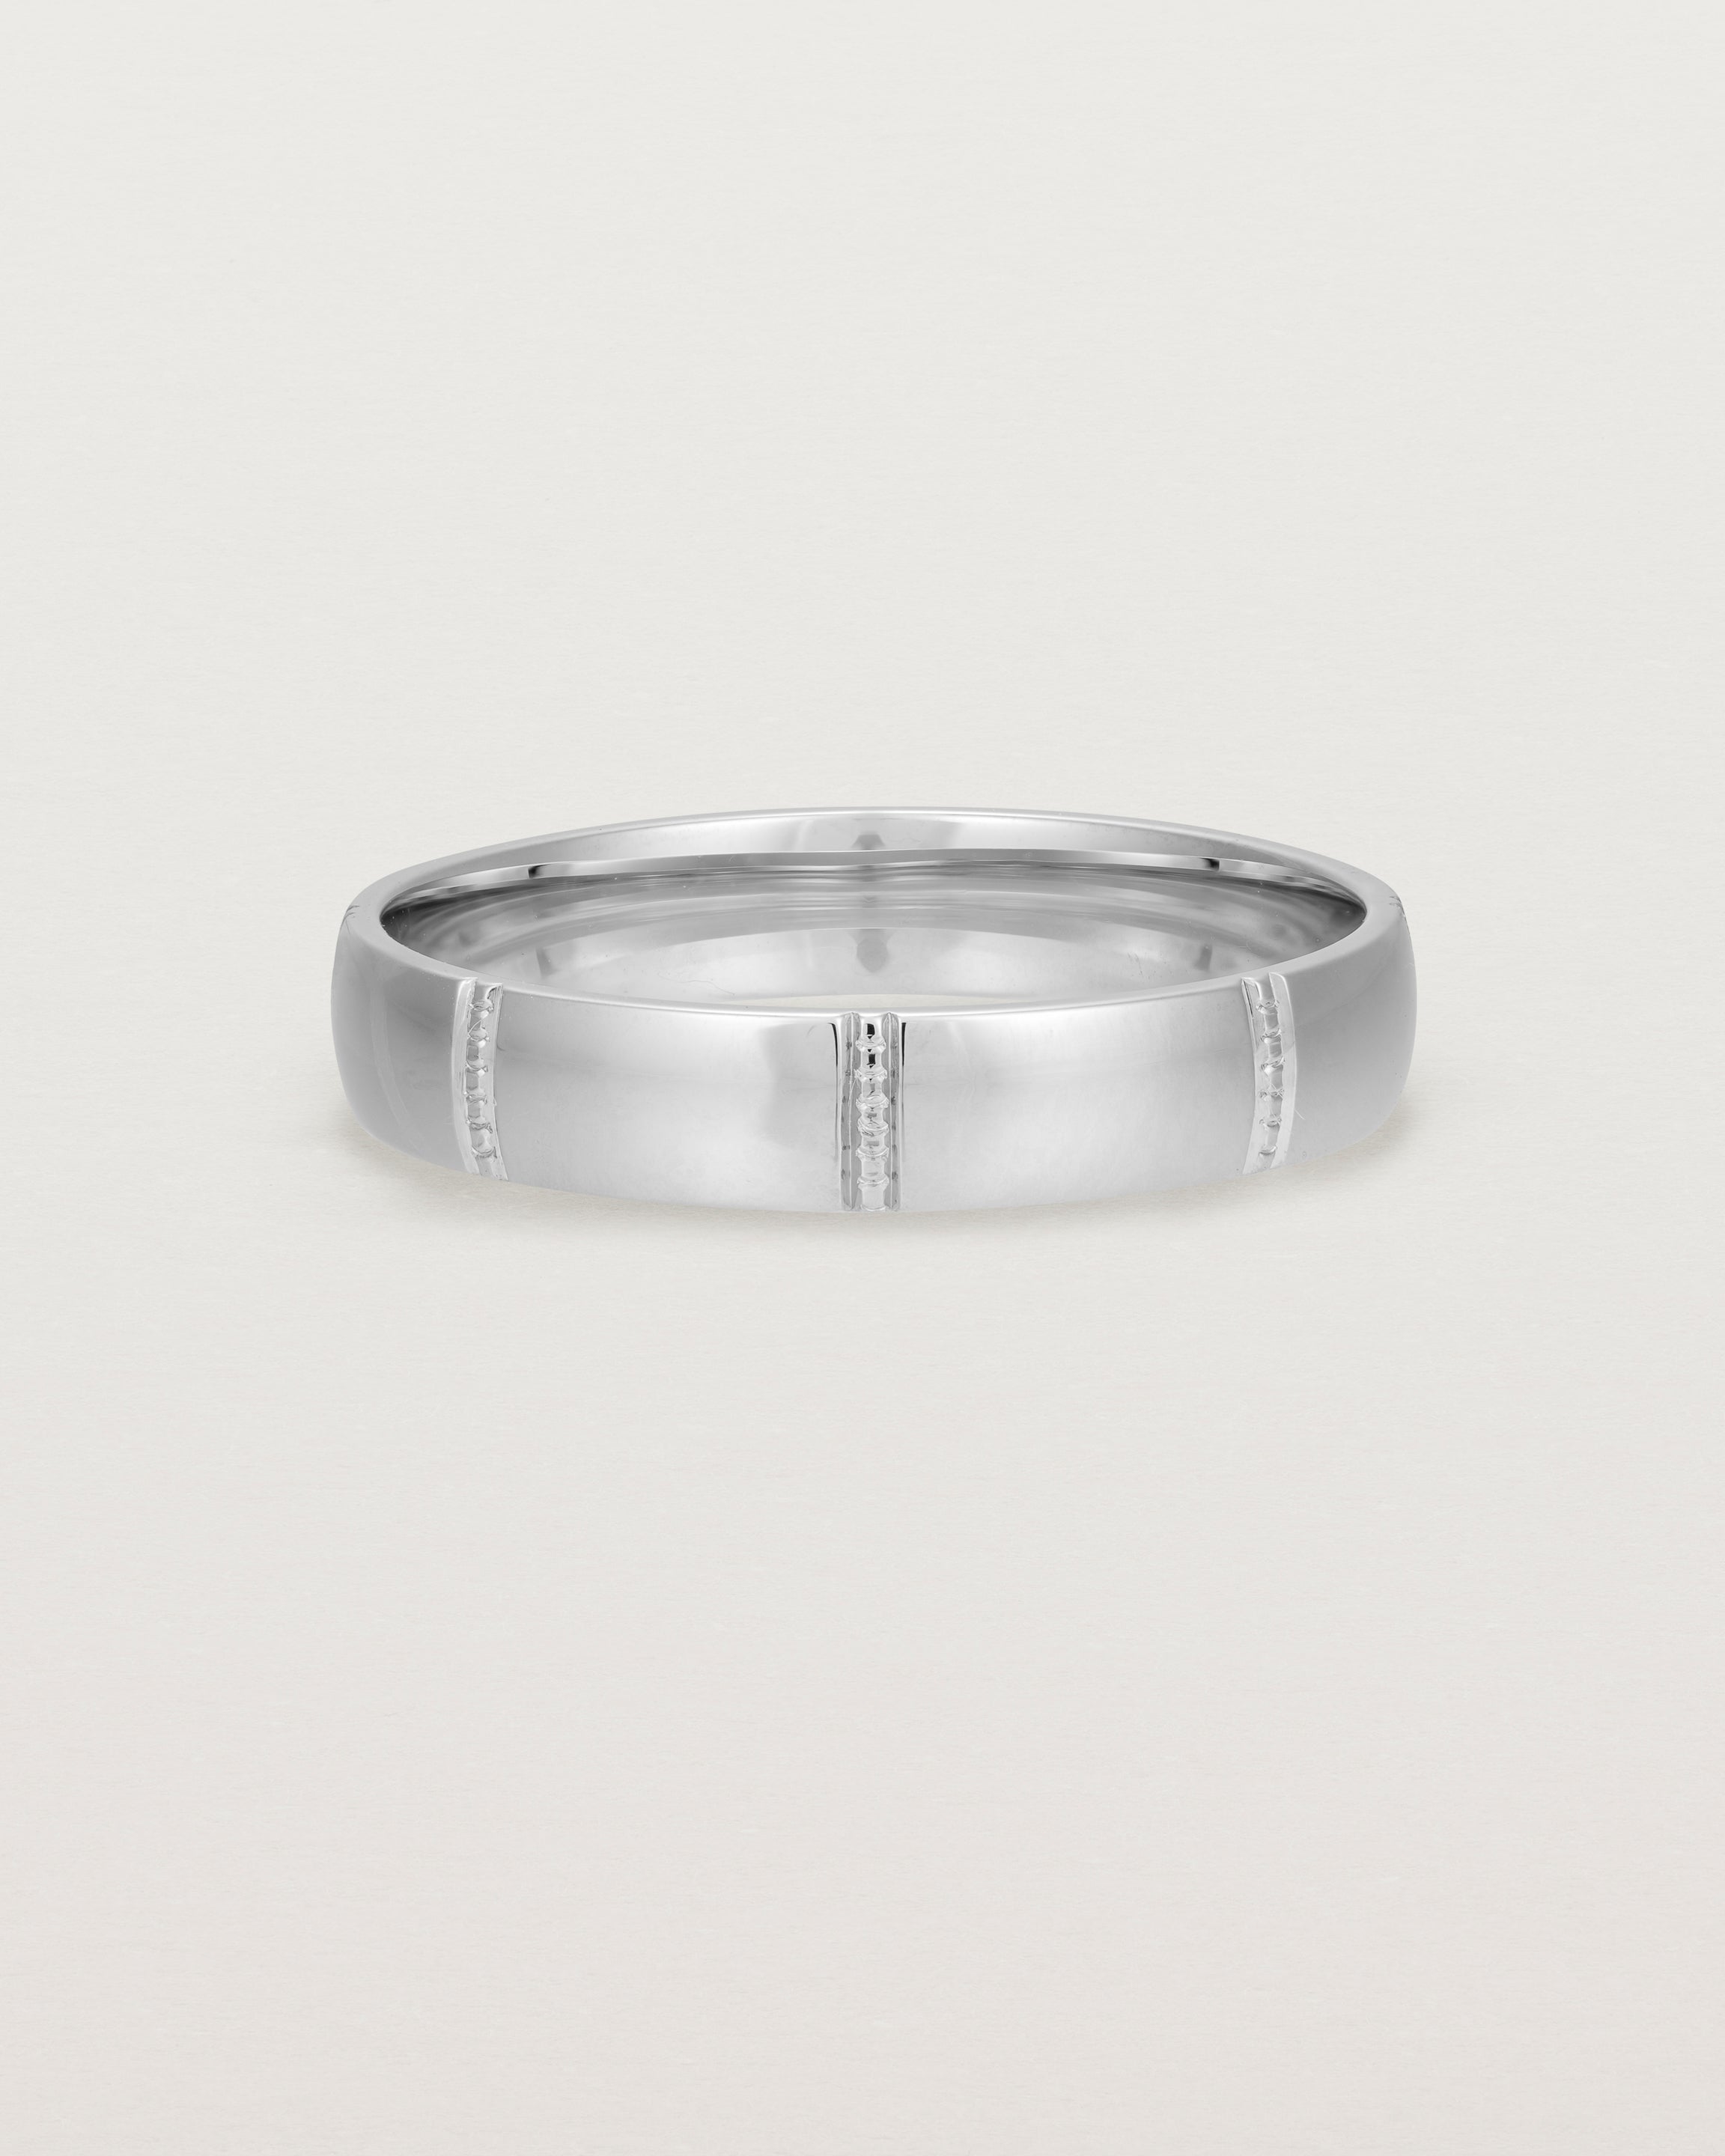 Front view of the Grain Wedding Ring | 4mm | White Gold.